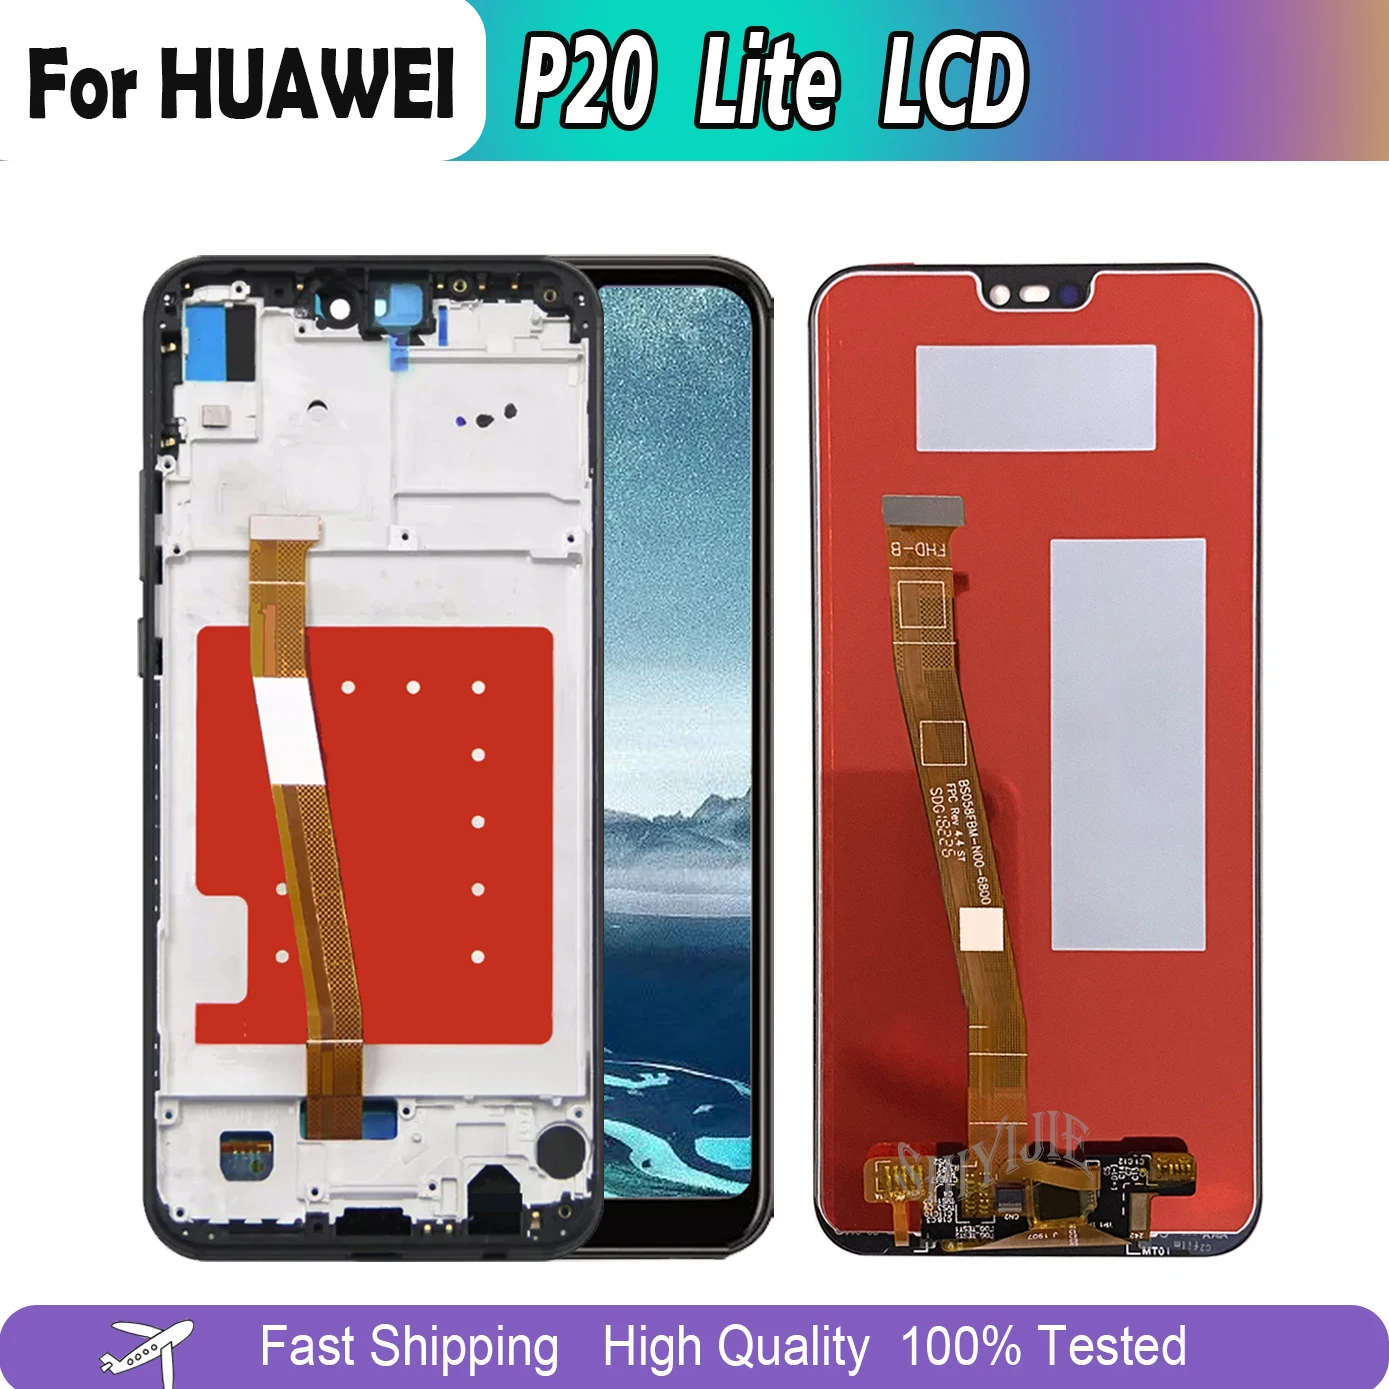 

Original Lcd For HUAWEI P20 Lite Display Touch Screen Assembly For HUAWEI DISPLAY P20lite/nova 3e Digitizer Replacement parts